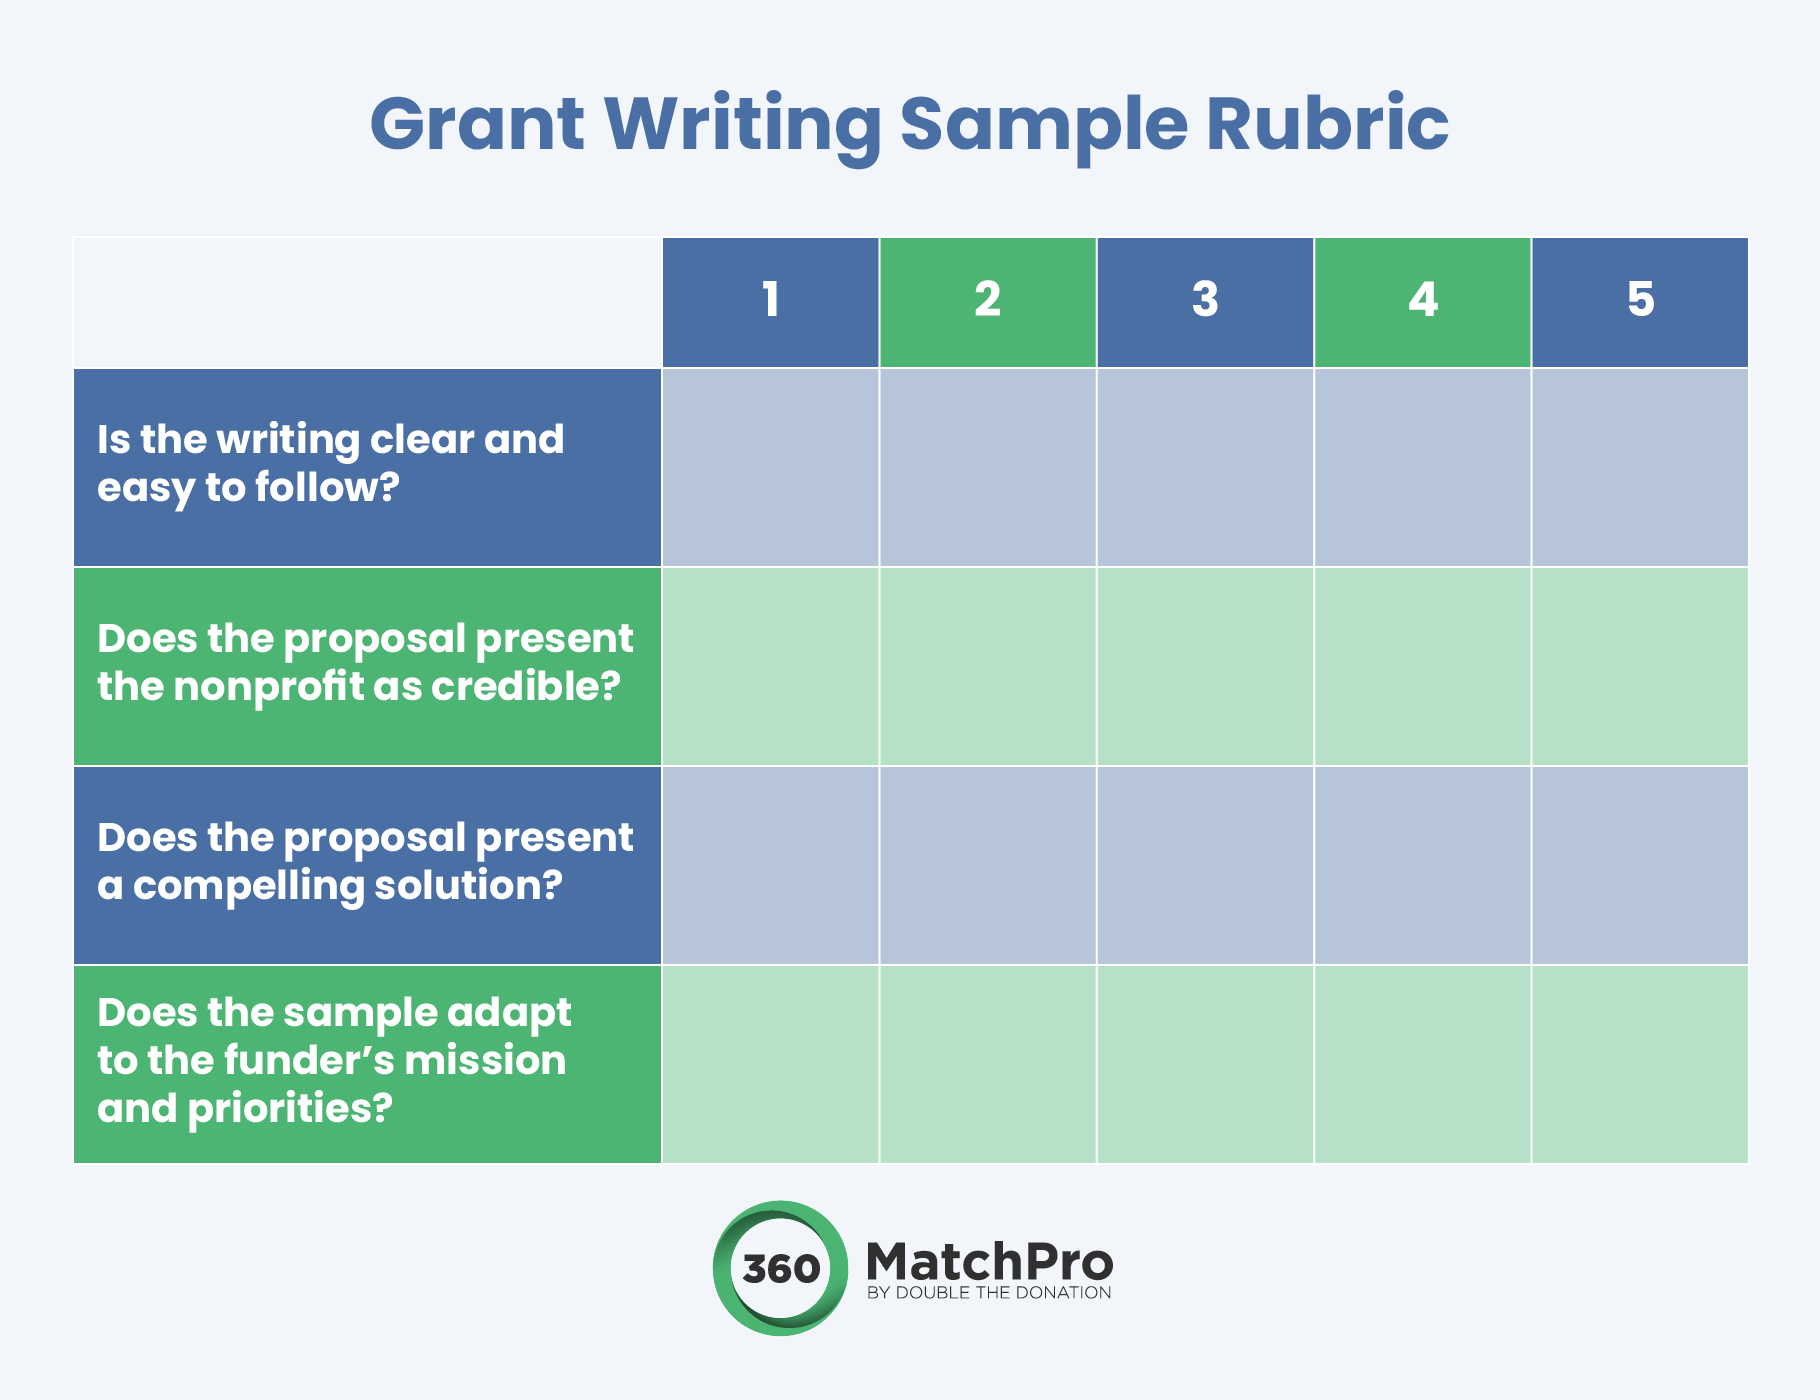 A sample rubric for evaluating writing samples while hiring a grants consultant for your nonprofit.